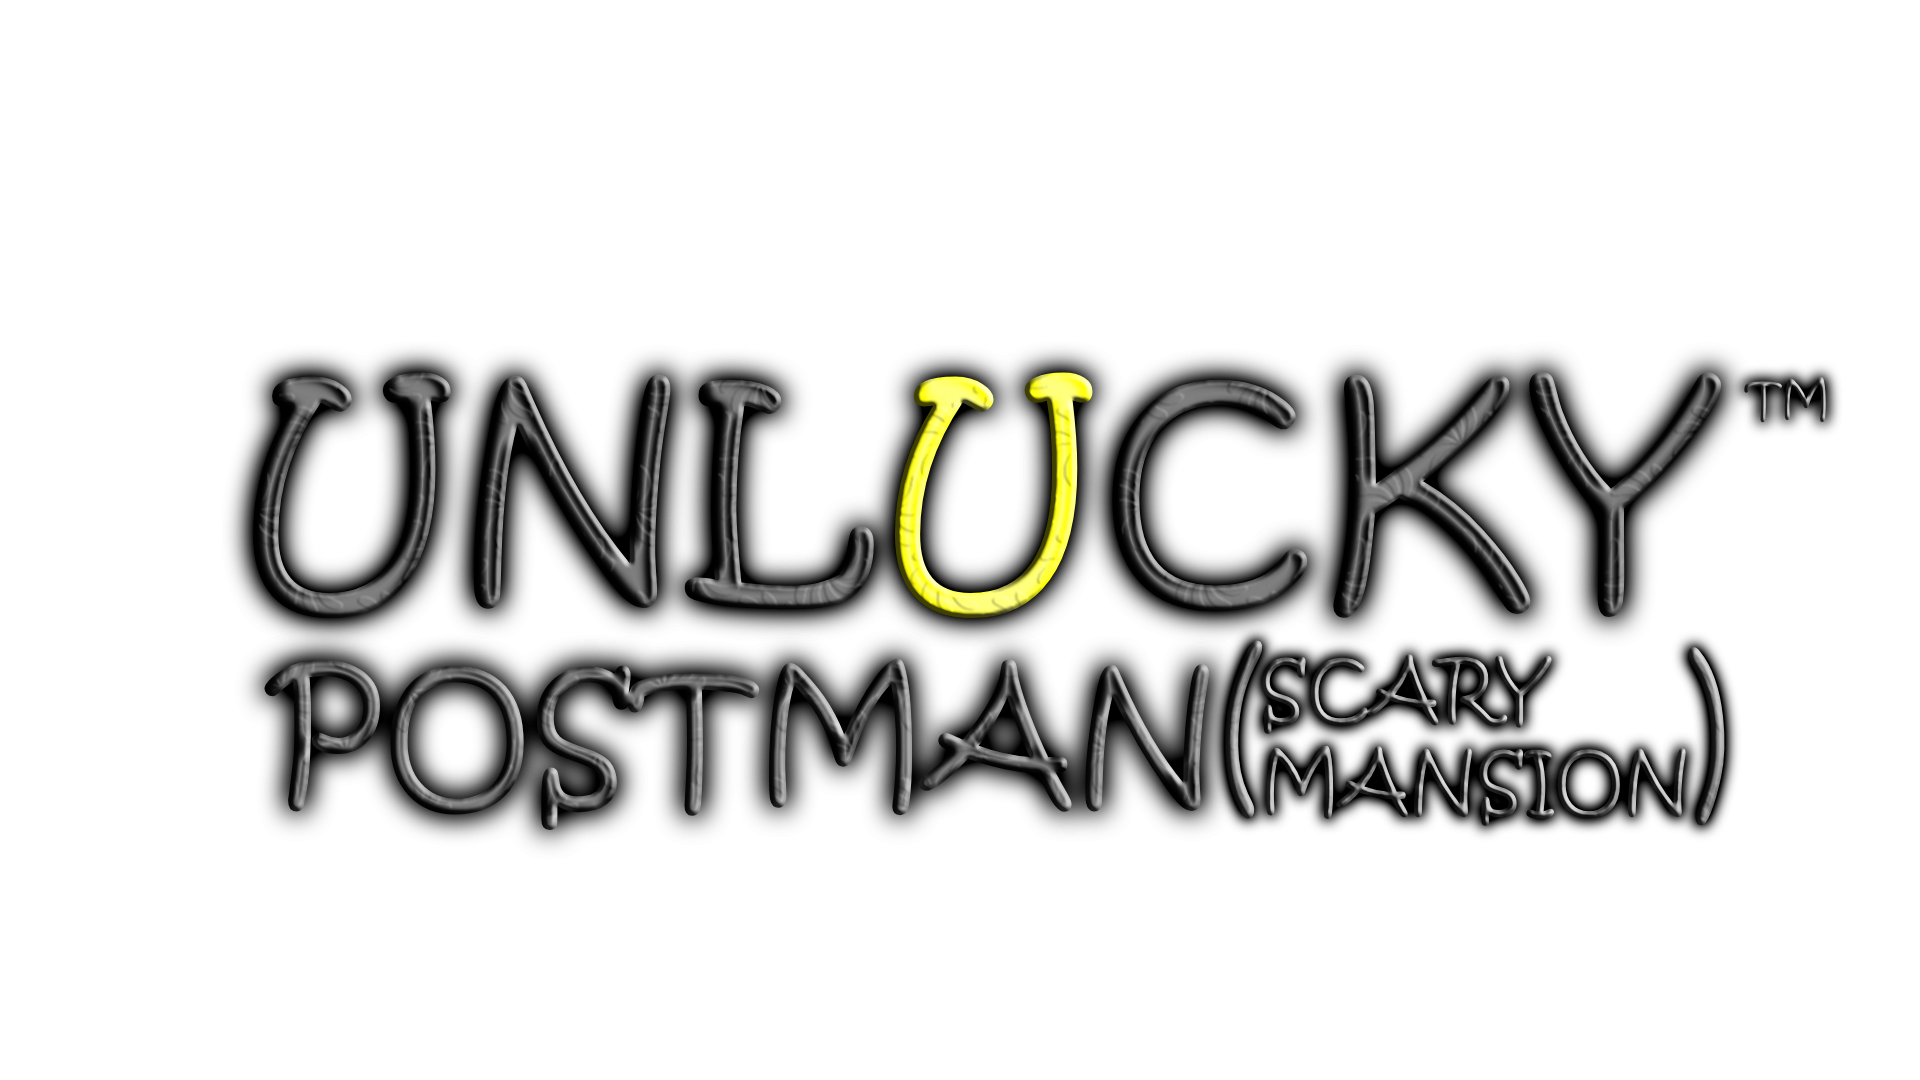 Unlucky Postman (Scary Mansion)